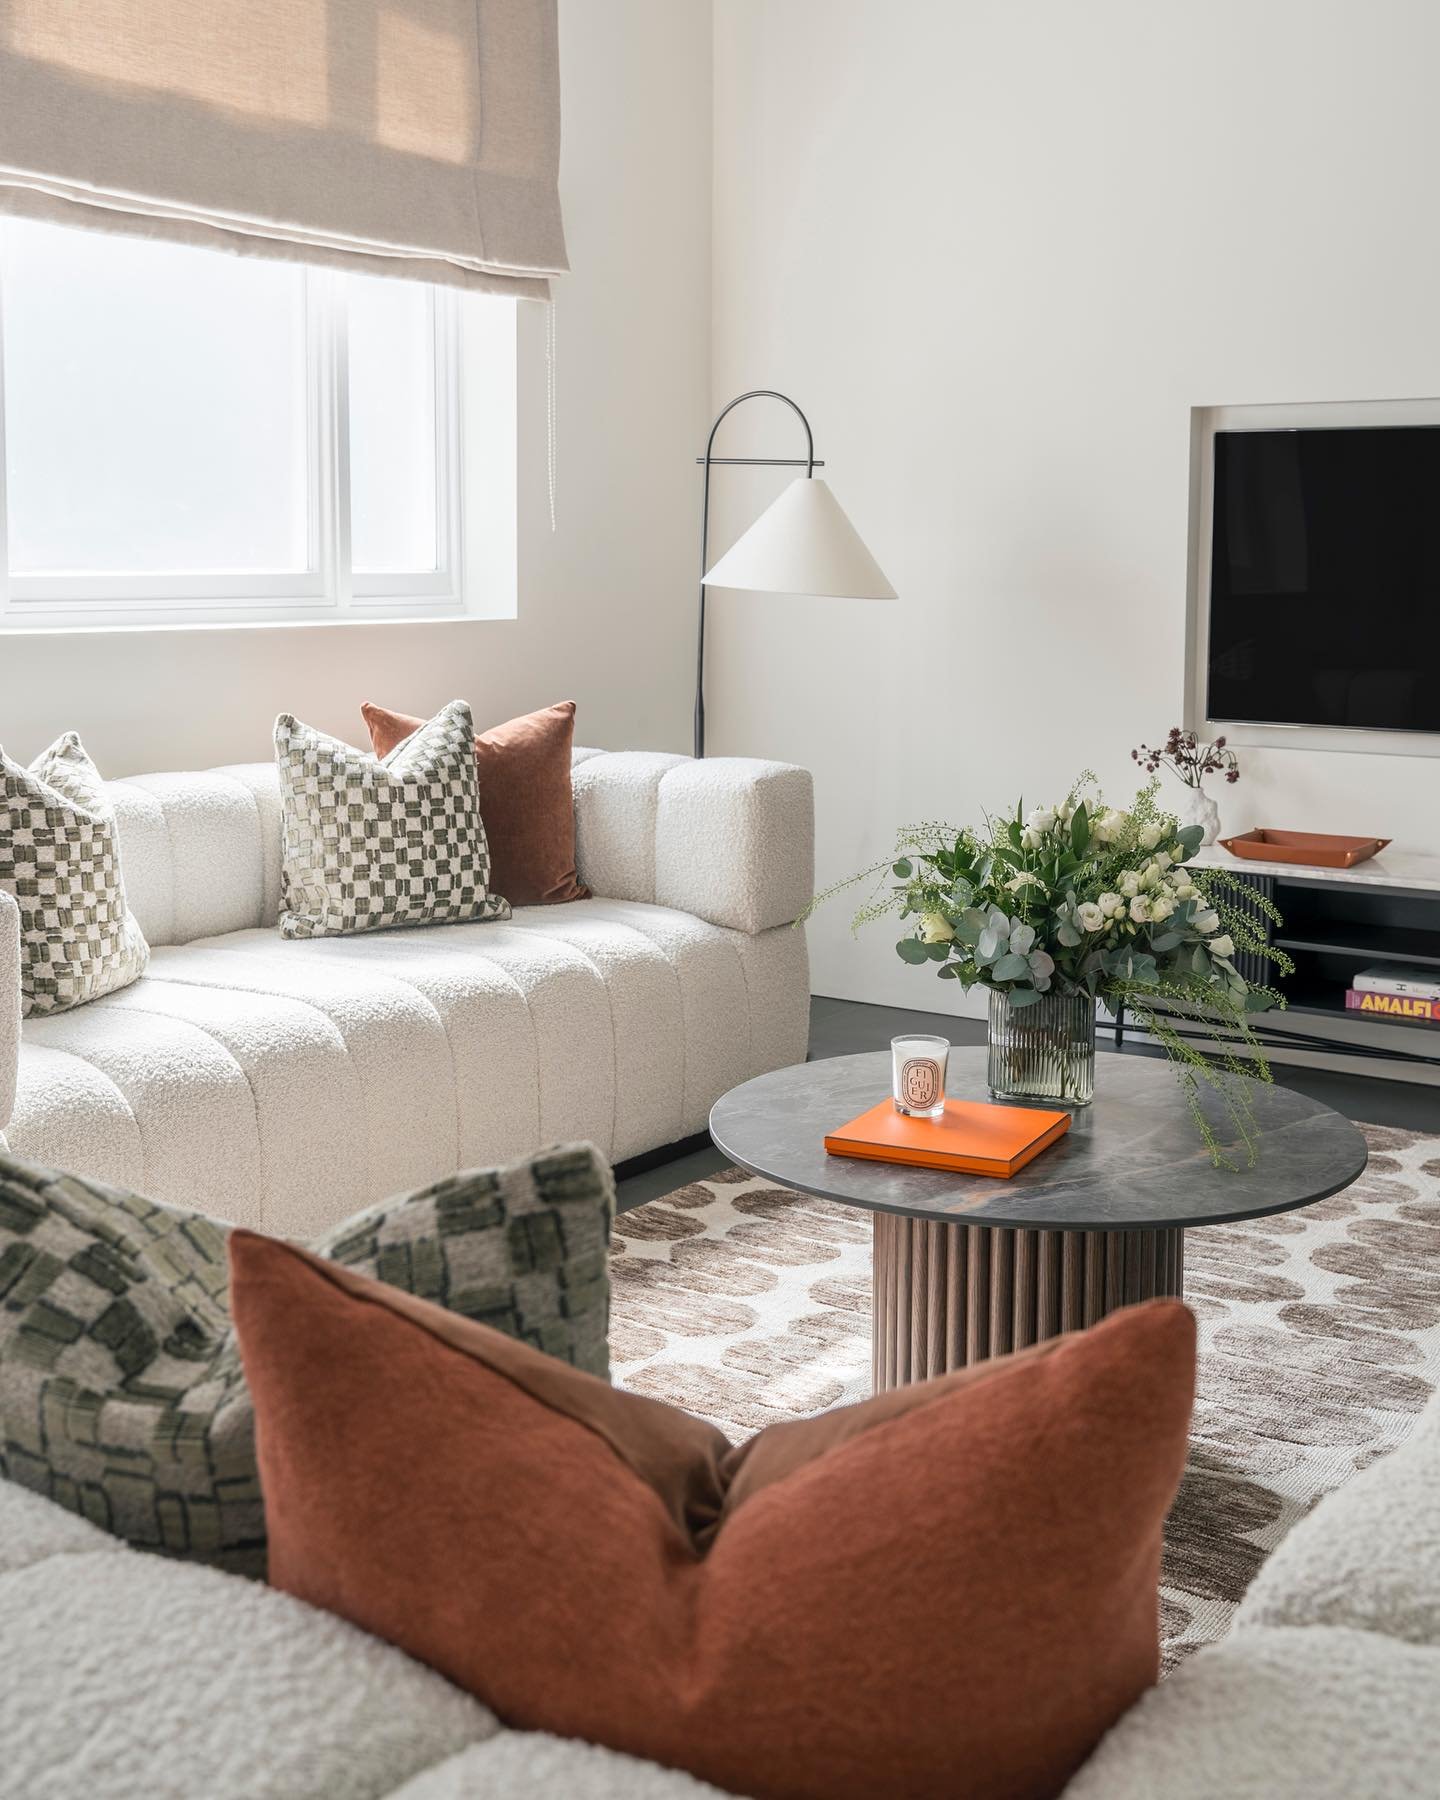 Our Marylebone Project
Our lovely clients wanted a neutral back drop, teamed with pops of rich colour tones, and playful form and texture. 
These large statement sofas were upholstered in a beautiful boucle fabric, complemented with cushions from @zi